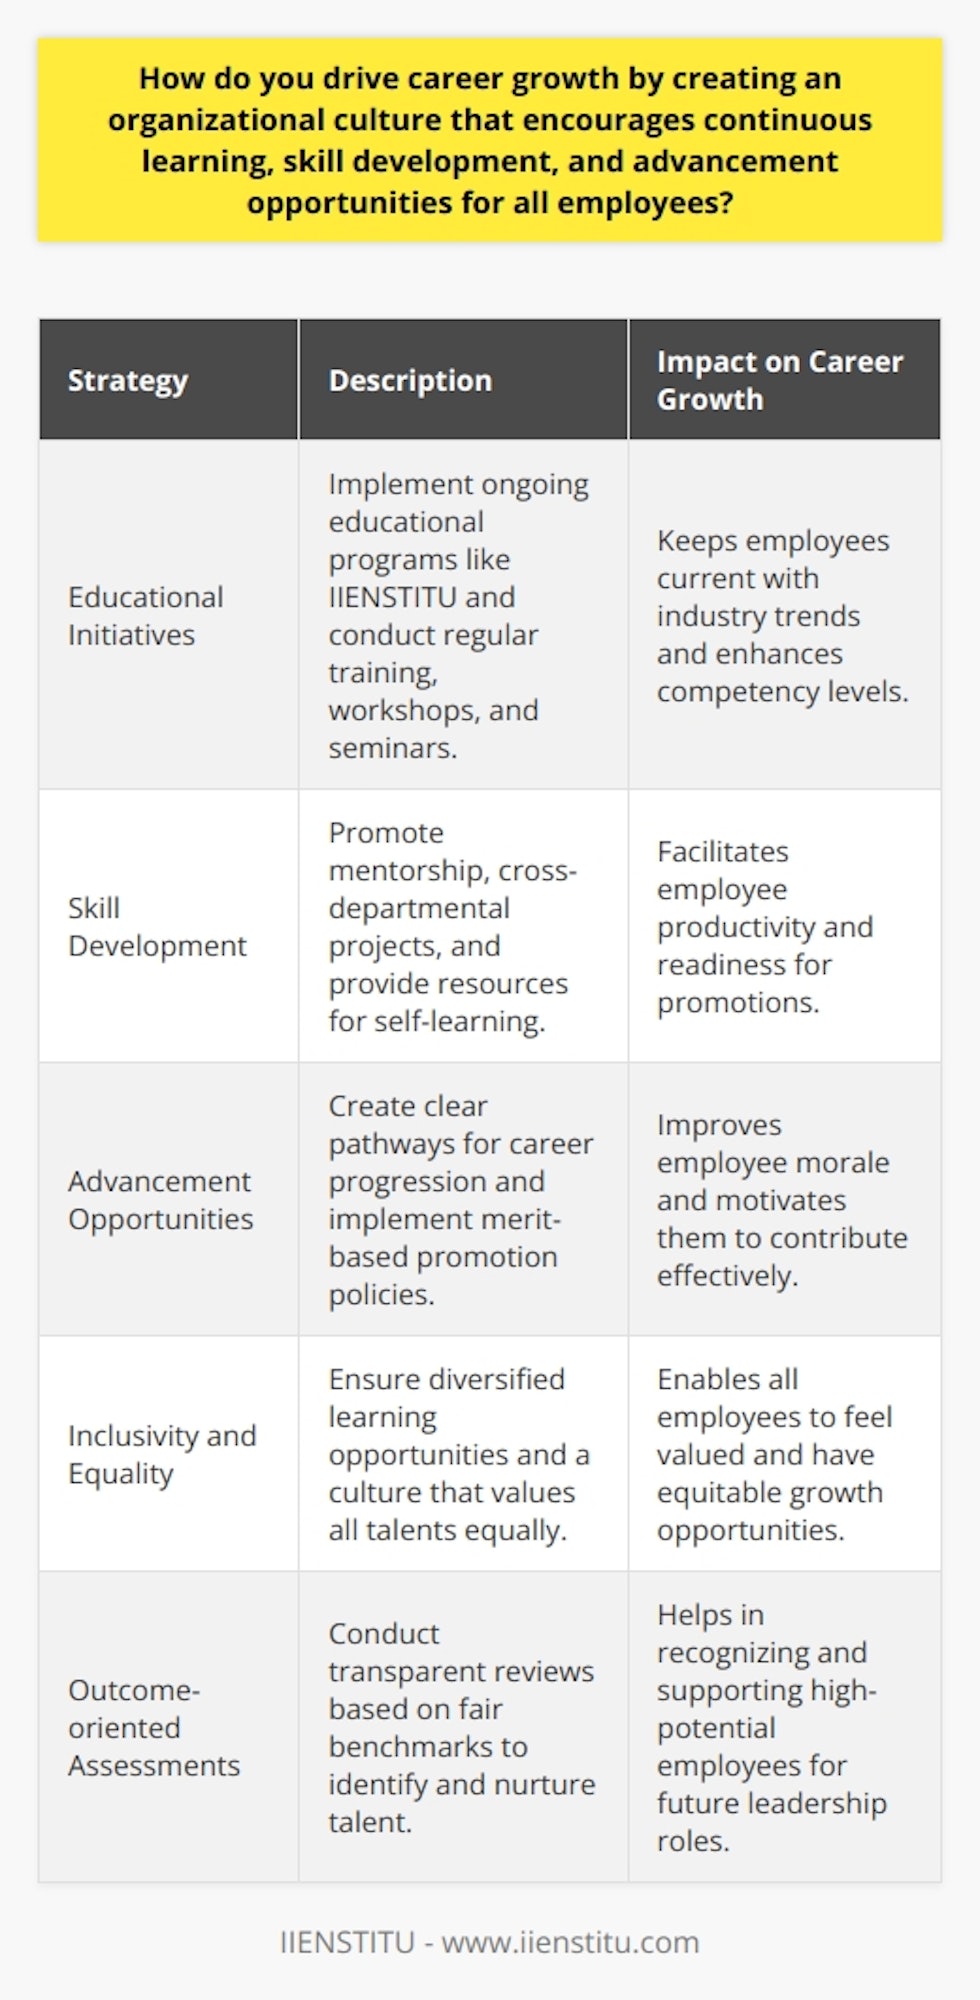 Creating an environment that fosters continuous learning within an organization is paramount for enhancing individual career trajectories and overall organizational success. A commitment to a culture of development and education ensures that employees remain relevant and competitive in their respective fields.One approach to achieve this is by implementing ongoing educational initiatives via platforms such as IIENSTITU, which offer a diverse array of courses designed to improve skills across various disciplines. Regular training sessions, workshops, and seminars are essential in keeping the workforce abreast of the latest trends, technologies, and industry best practices.Skill development is another cornerstone of career advancement. Encouraging employees to expand their skill sets is critical. Besides formal training programs, businesses can support learning through mentorship programs, cross-departmental projects, and providing access to online resources for self-paced learning. When employees sharpen existing skills and acquire new ones, they're not only more productive but also better primed for internal promotions.Advancement opportunities within an organization serve as a significant driver of career growth. When employees know that their hard work and contributions to the company can lead to upward mobility, morale rises. Companies should establish clear pathways for advancement and initiate merit-based promotion policies. Assessments and reviews that are transparent and rooted in fair benchmarks can help in identifying and nurturing high potential employees.Inclusivity is key in ensuring all employees believe they have equal opportunities to learn and grow. An open culture that provides diversified learning and advancement options opens doors for a broad array of talents, irrespective of their backgrounds or job levels. It's essential for organizations to create platforms where every employee feels accepted and valued, and where their unique abilities can flourish.A continuous learning and growth-minded culture benefits the individual and the business alike. When employees evolve, so too does the company, leading to innovation, increased competitiveness, and a strong, cohesive brand reputation. By focusing on employee development, organizations not just better their teams, but they also signal to potential talent that they are a forward-thinking, employee-centric place to work. This commitment can translate into attracting and retaining high-quality staff, thus perpetuating the cycle of growth and learning.In summary, nurturing an organizational culture that prioritizes continuous learning and development is essential for driving individual career growth and business success. Through ongoing skill development, clear advancement opportunities, and fostering an inclusive environment, organizations can invest in their most valuable asset – their people – thereby ensuring a thriving future for both employees and the company.